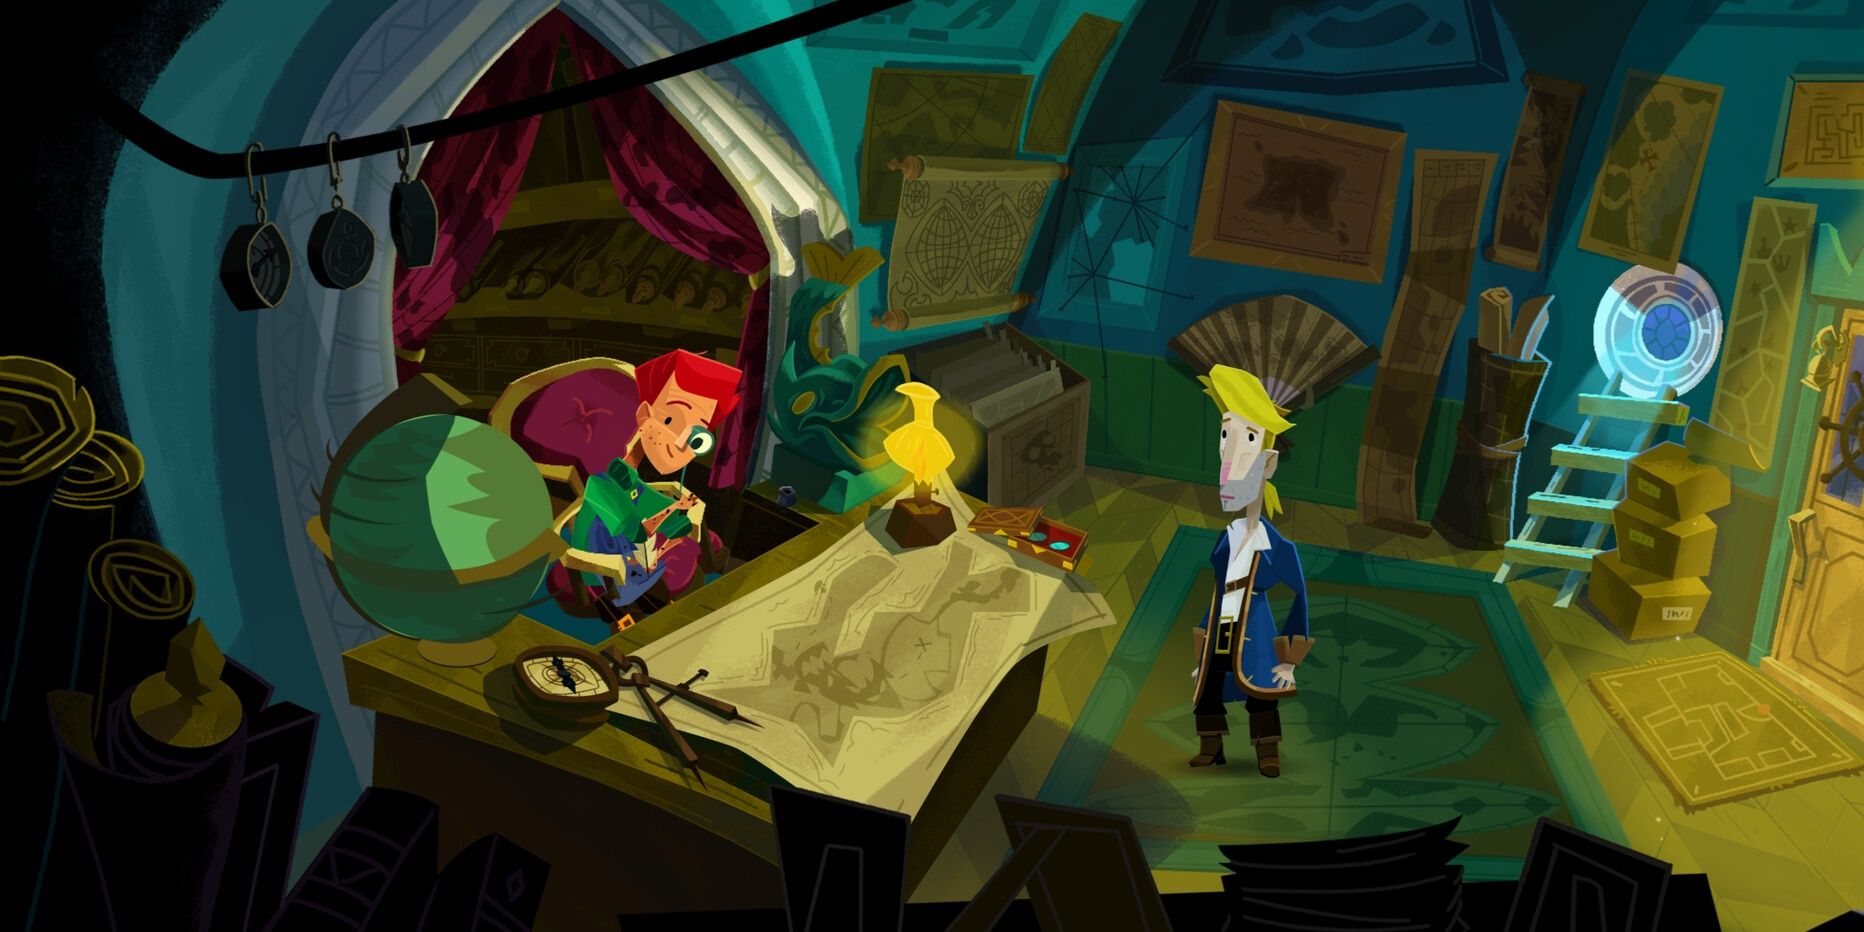 Guybrush Threepwood talking with his friend in a map shop in Return to Monkey Island